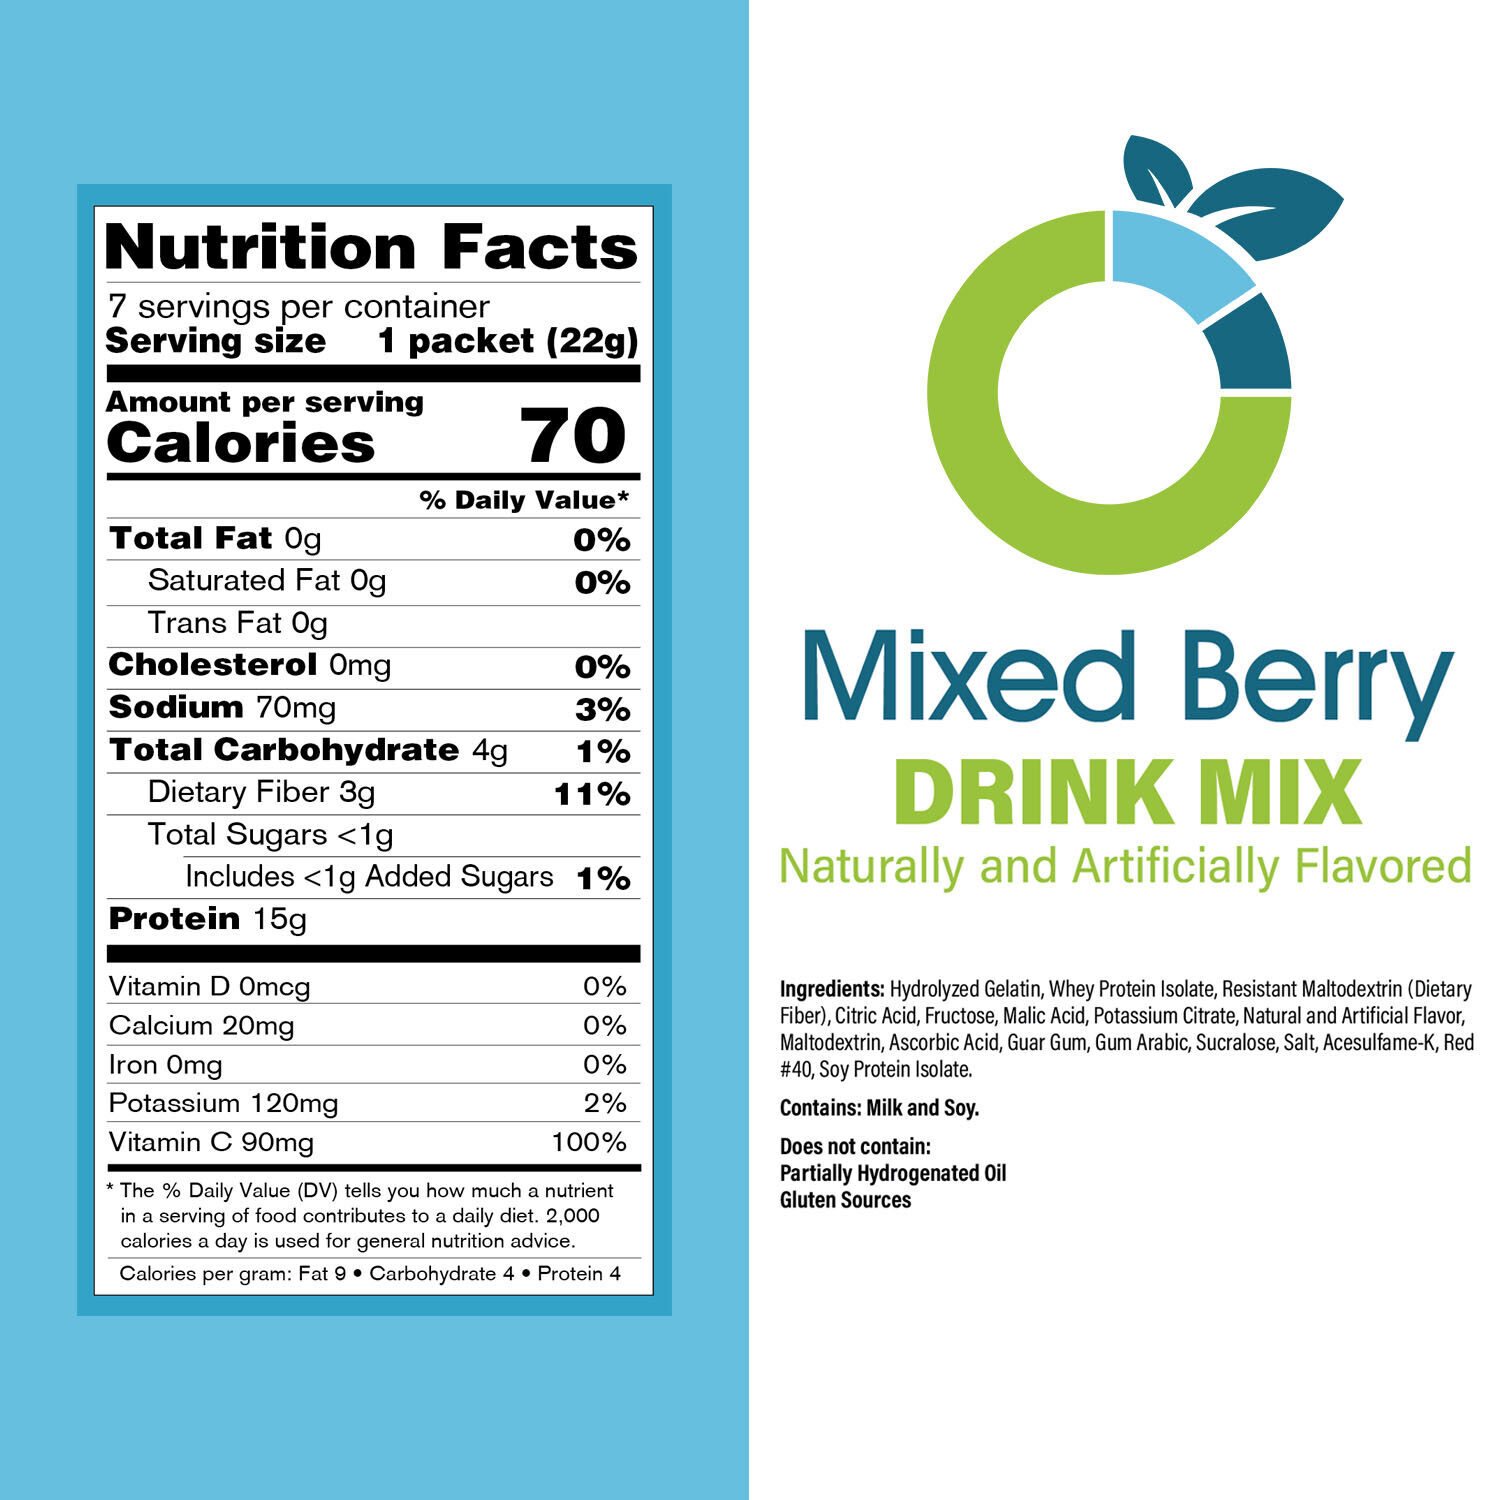 Mixed-Berry-Drink-Mix-Panel_05dc05dc0_78735